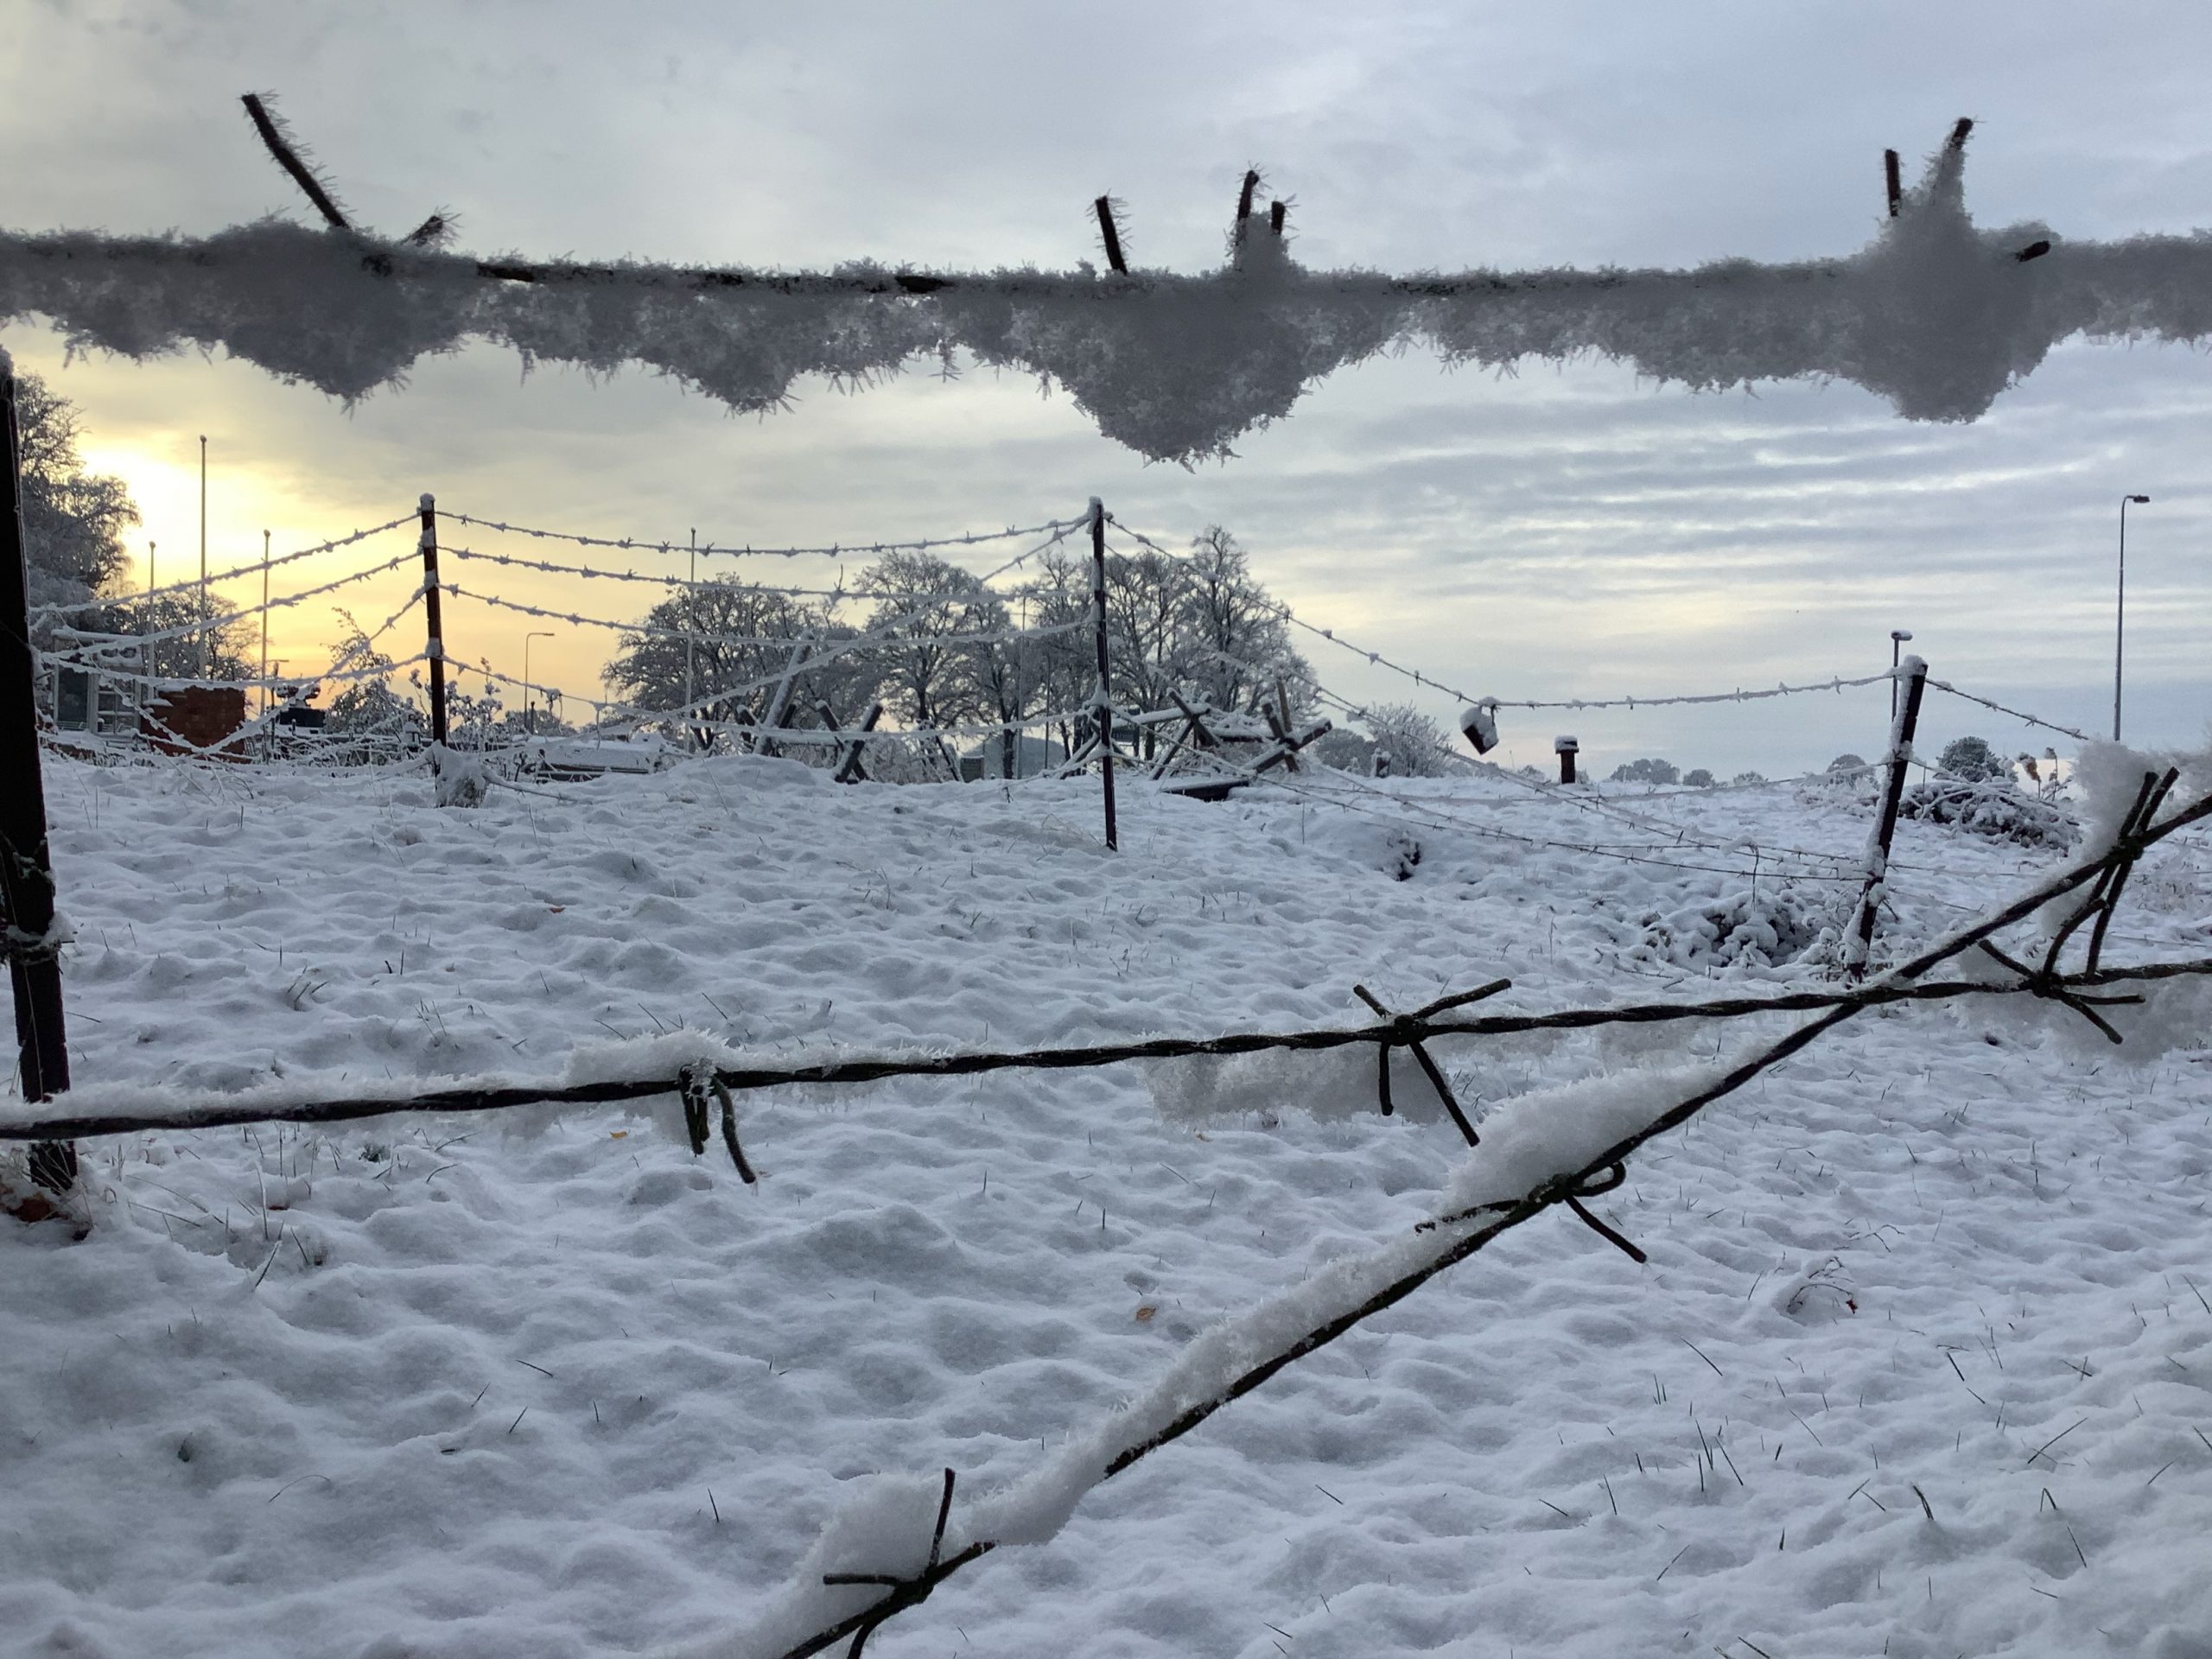 Snow covered ground. The sun rising in the distance. Barbed wire with freezing snow crossing the image/